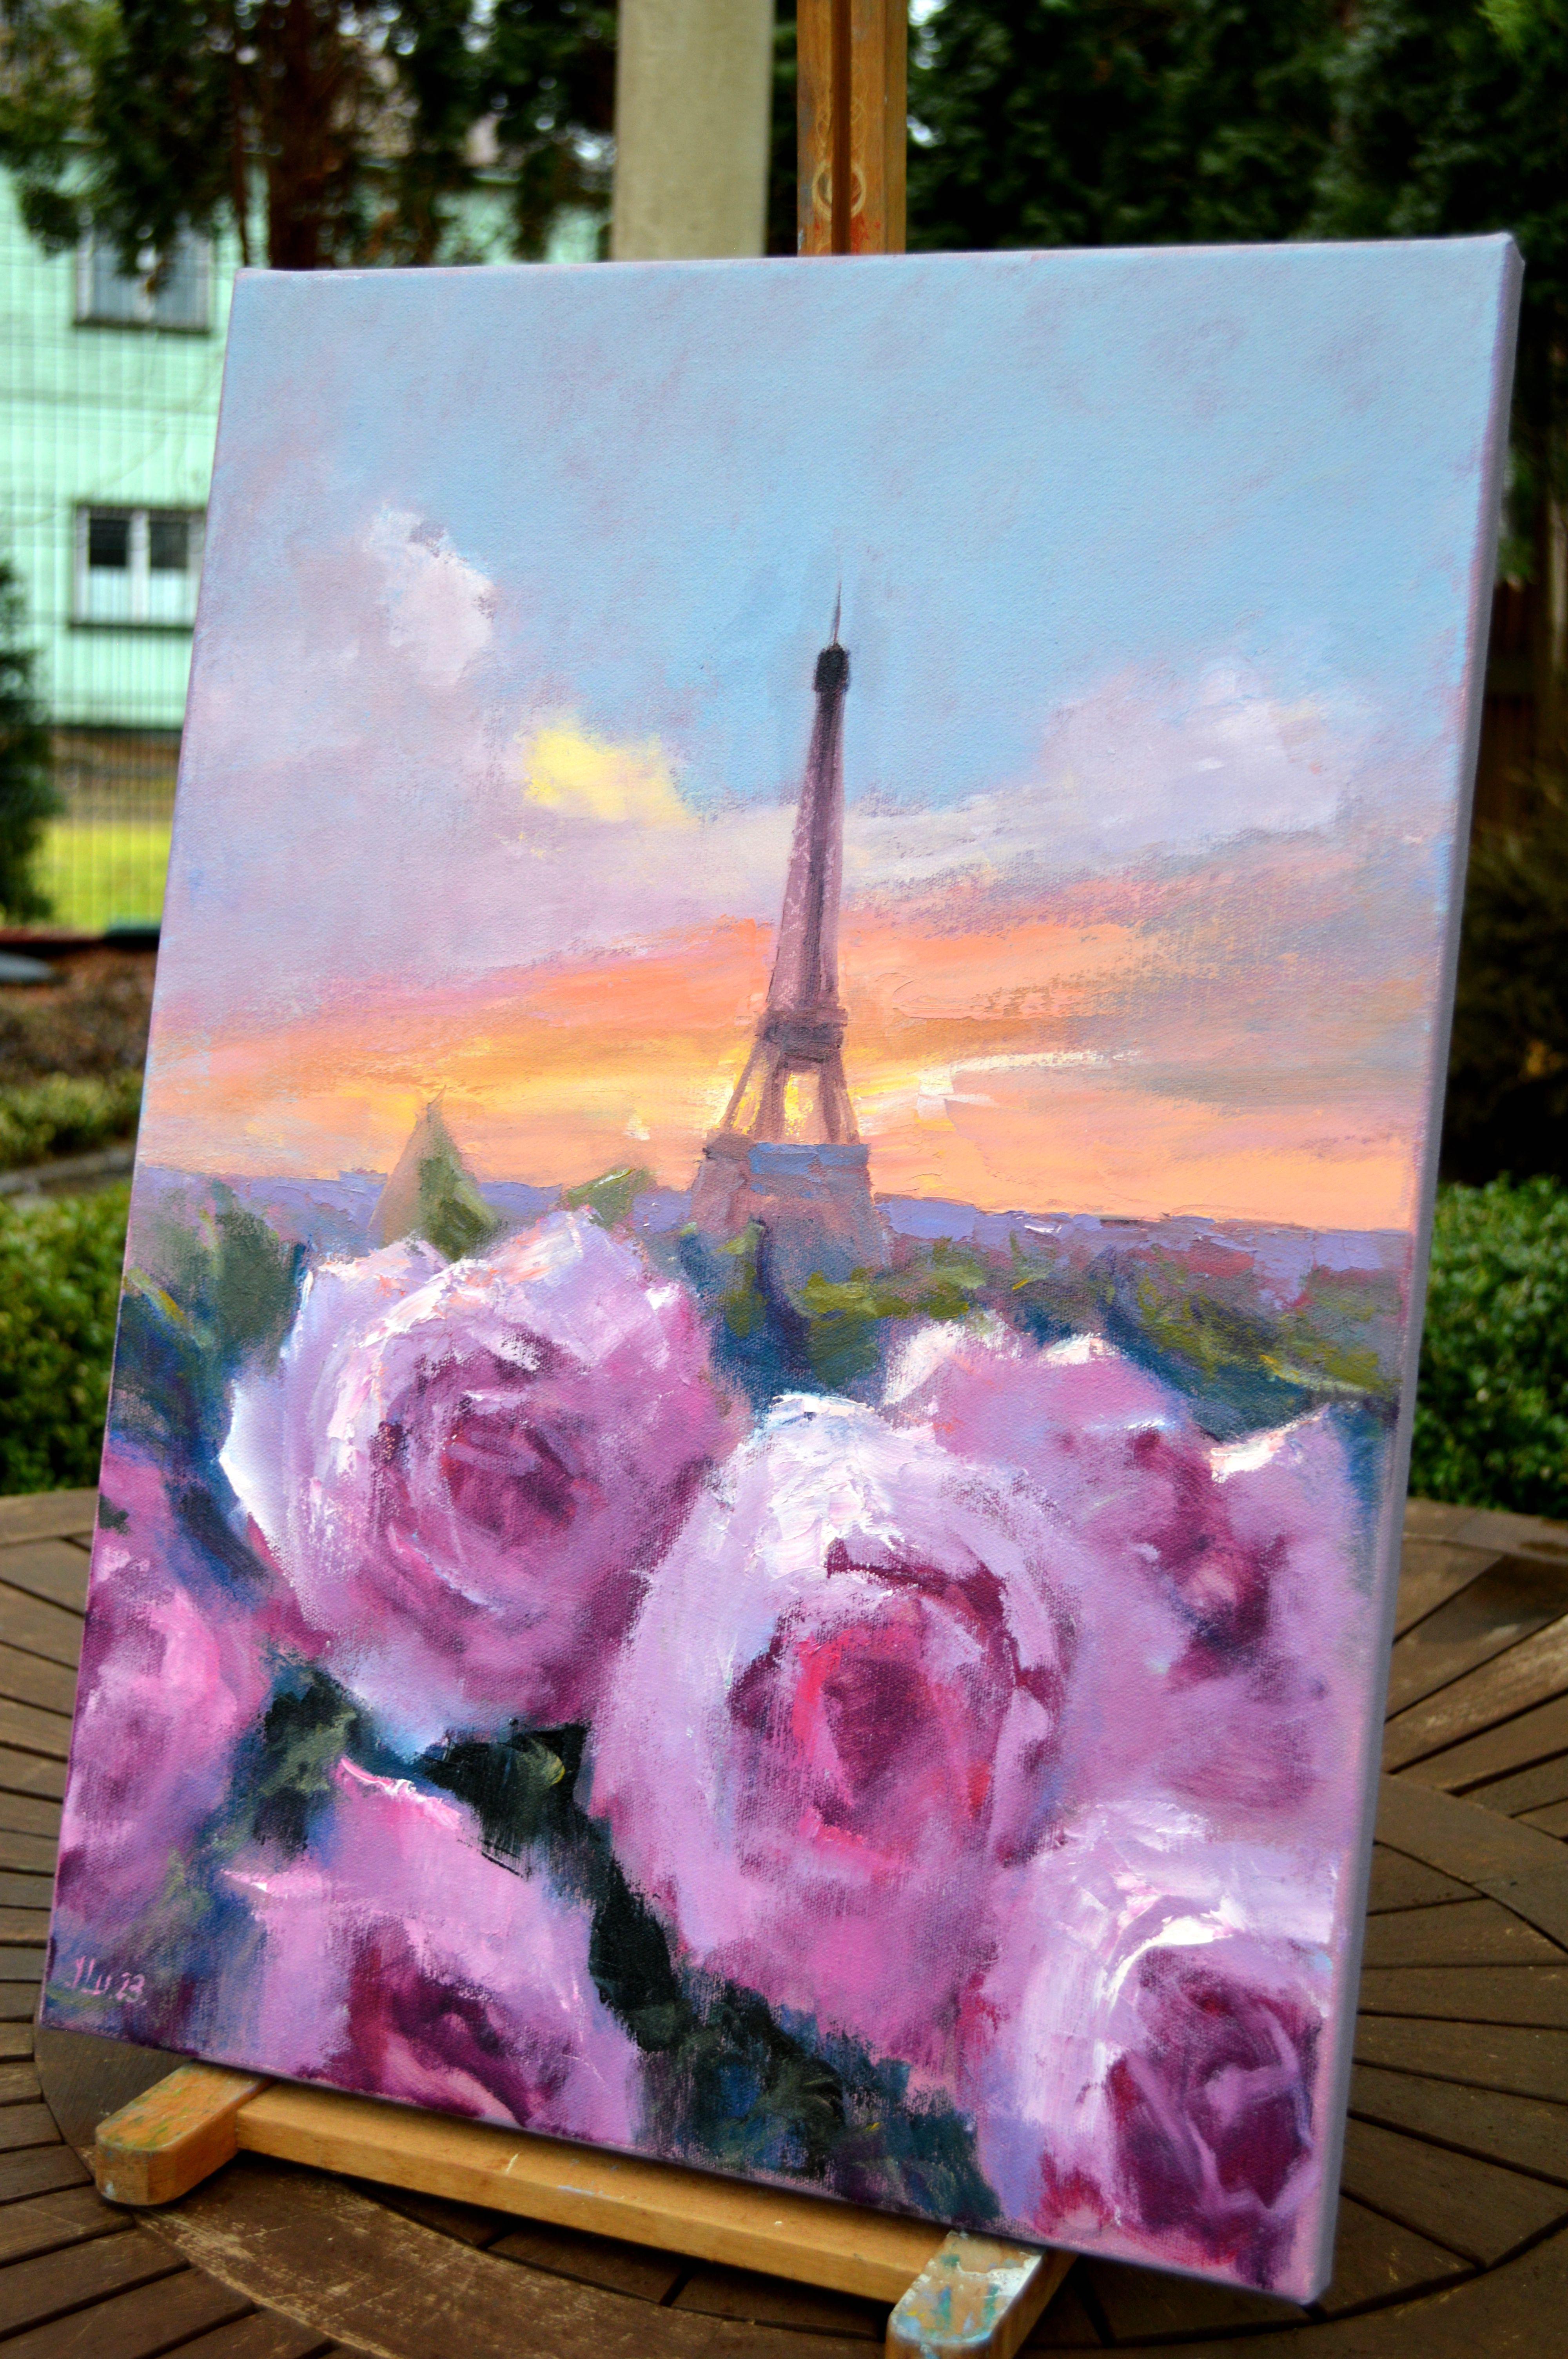 In this oil painting, I've captured the essence of love and beauty inspired by the enchanting city of Paris. The vivid, soft brushstrokes of the blooming roses in the foreground are juxtaposed against the iconic silhouette of the Eiffel Tower at